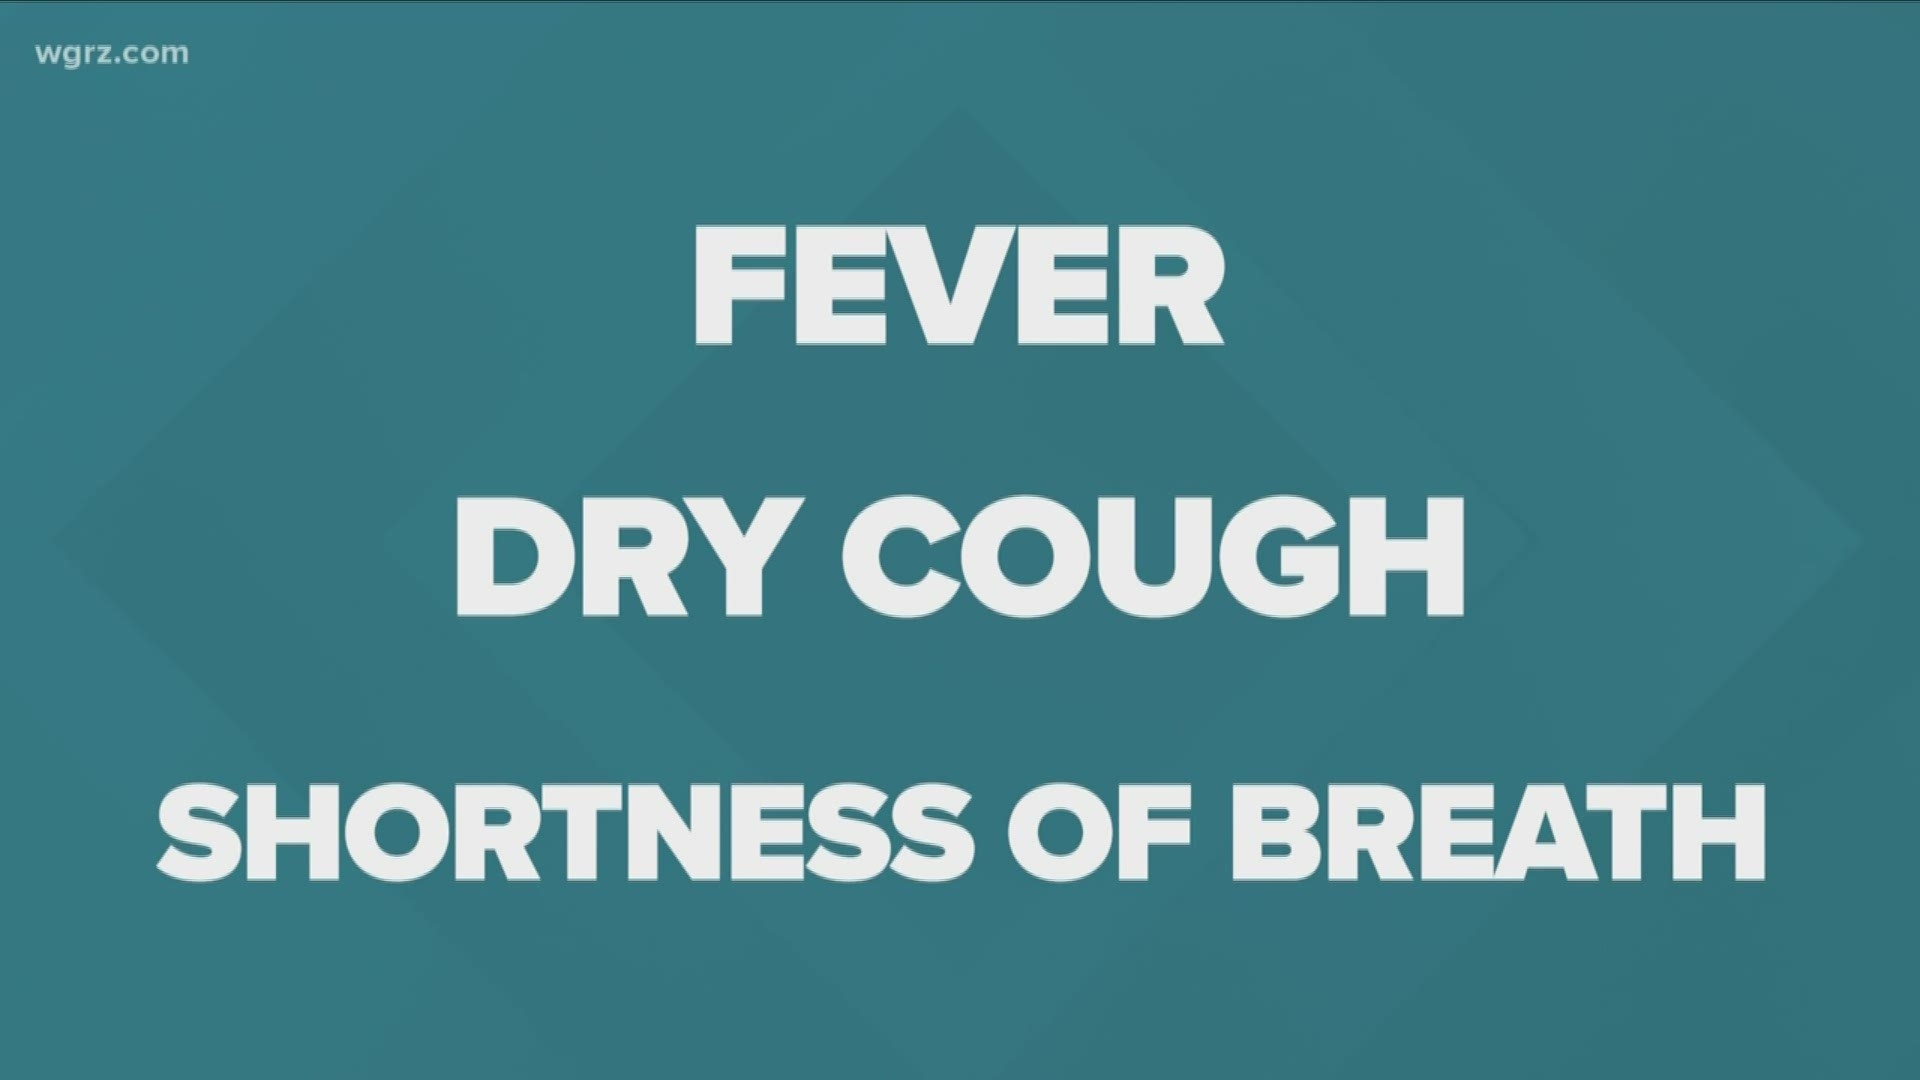 The big change now is if you have Covid-19 symptoms is a fever plus either a cough, or shortness of breath. If you have these 3 symptoms, a test will be authorized.